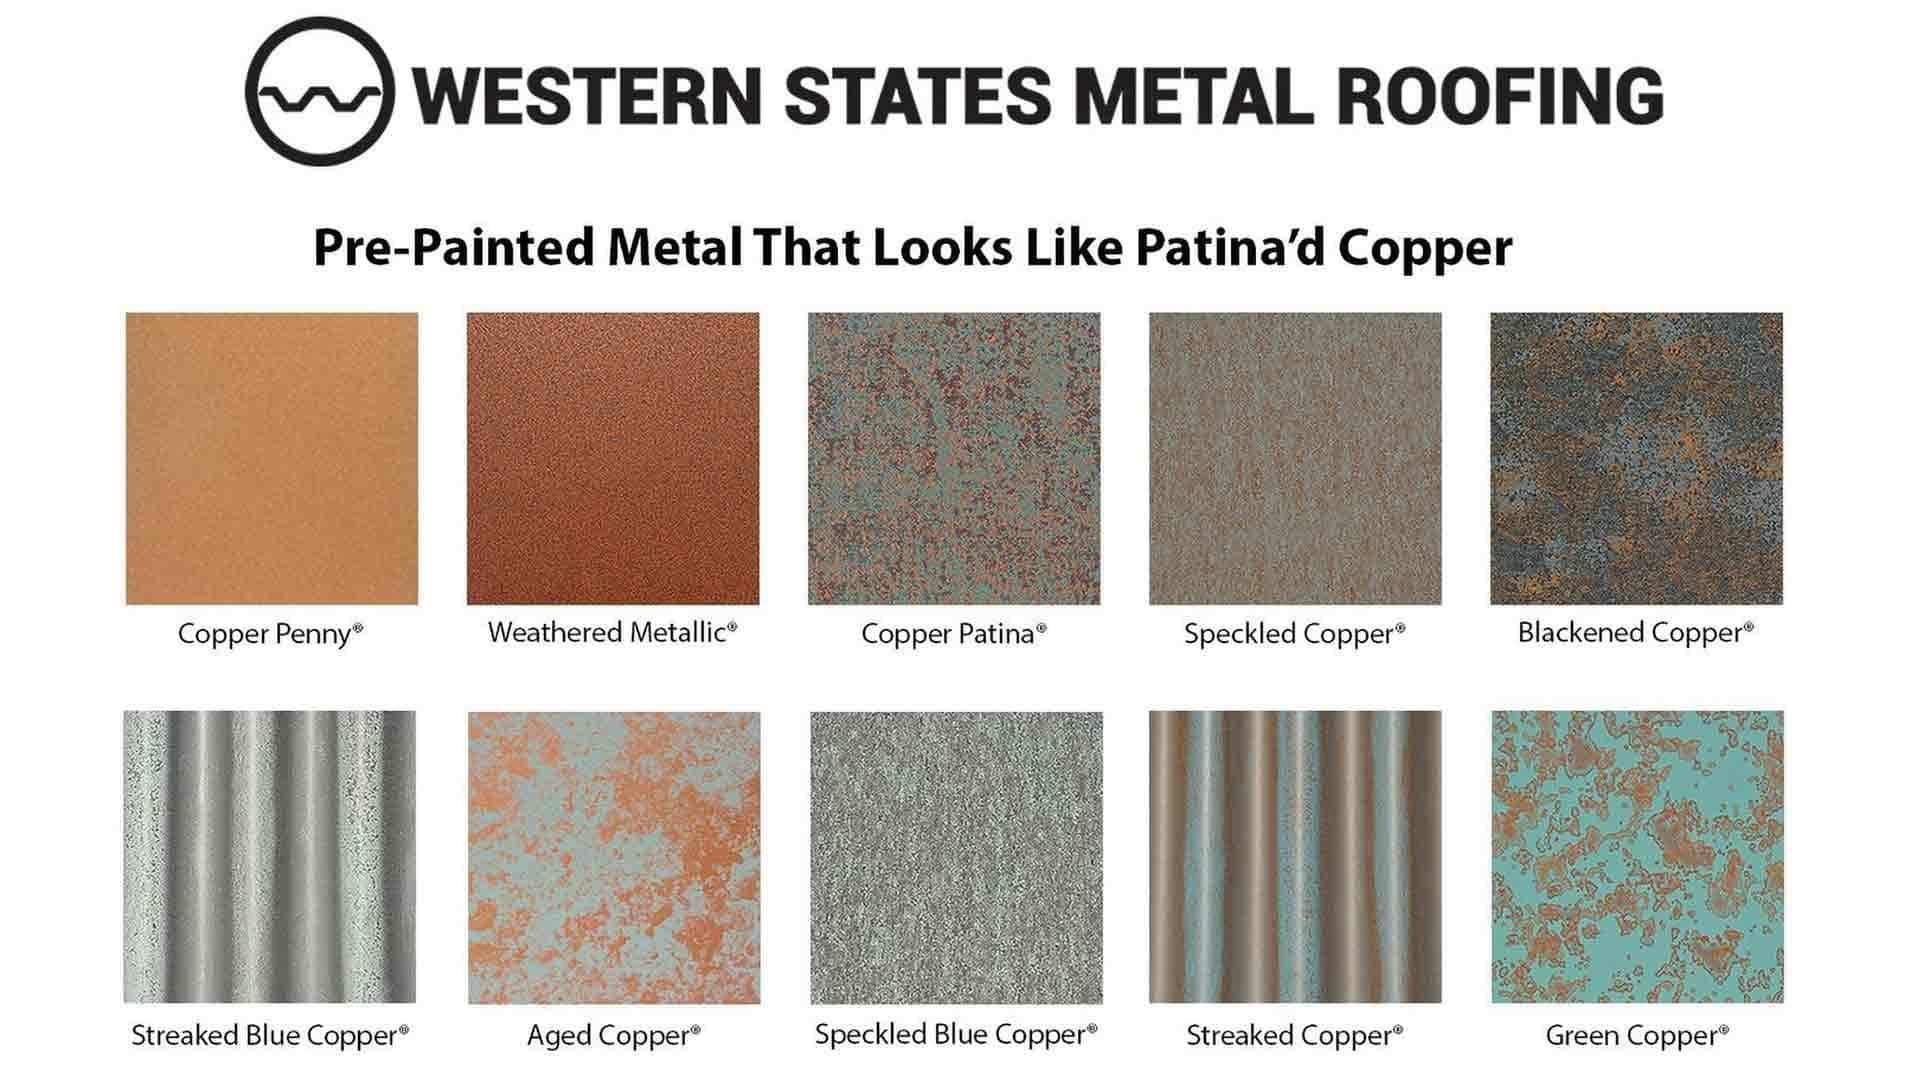 pre-painted-metal-that-looks-like-patinad-copper